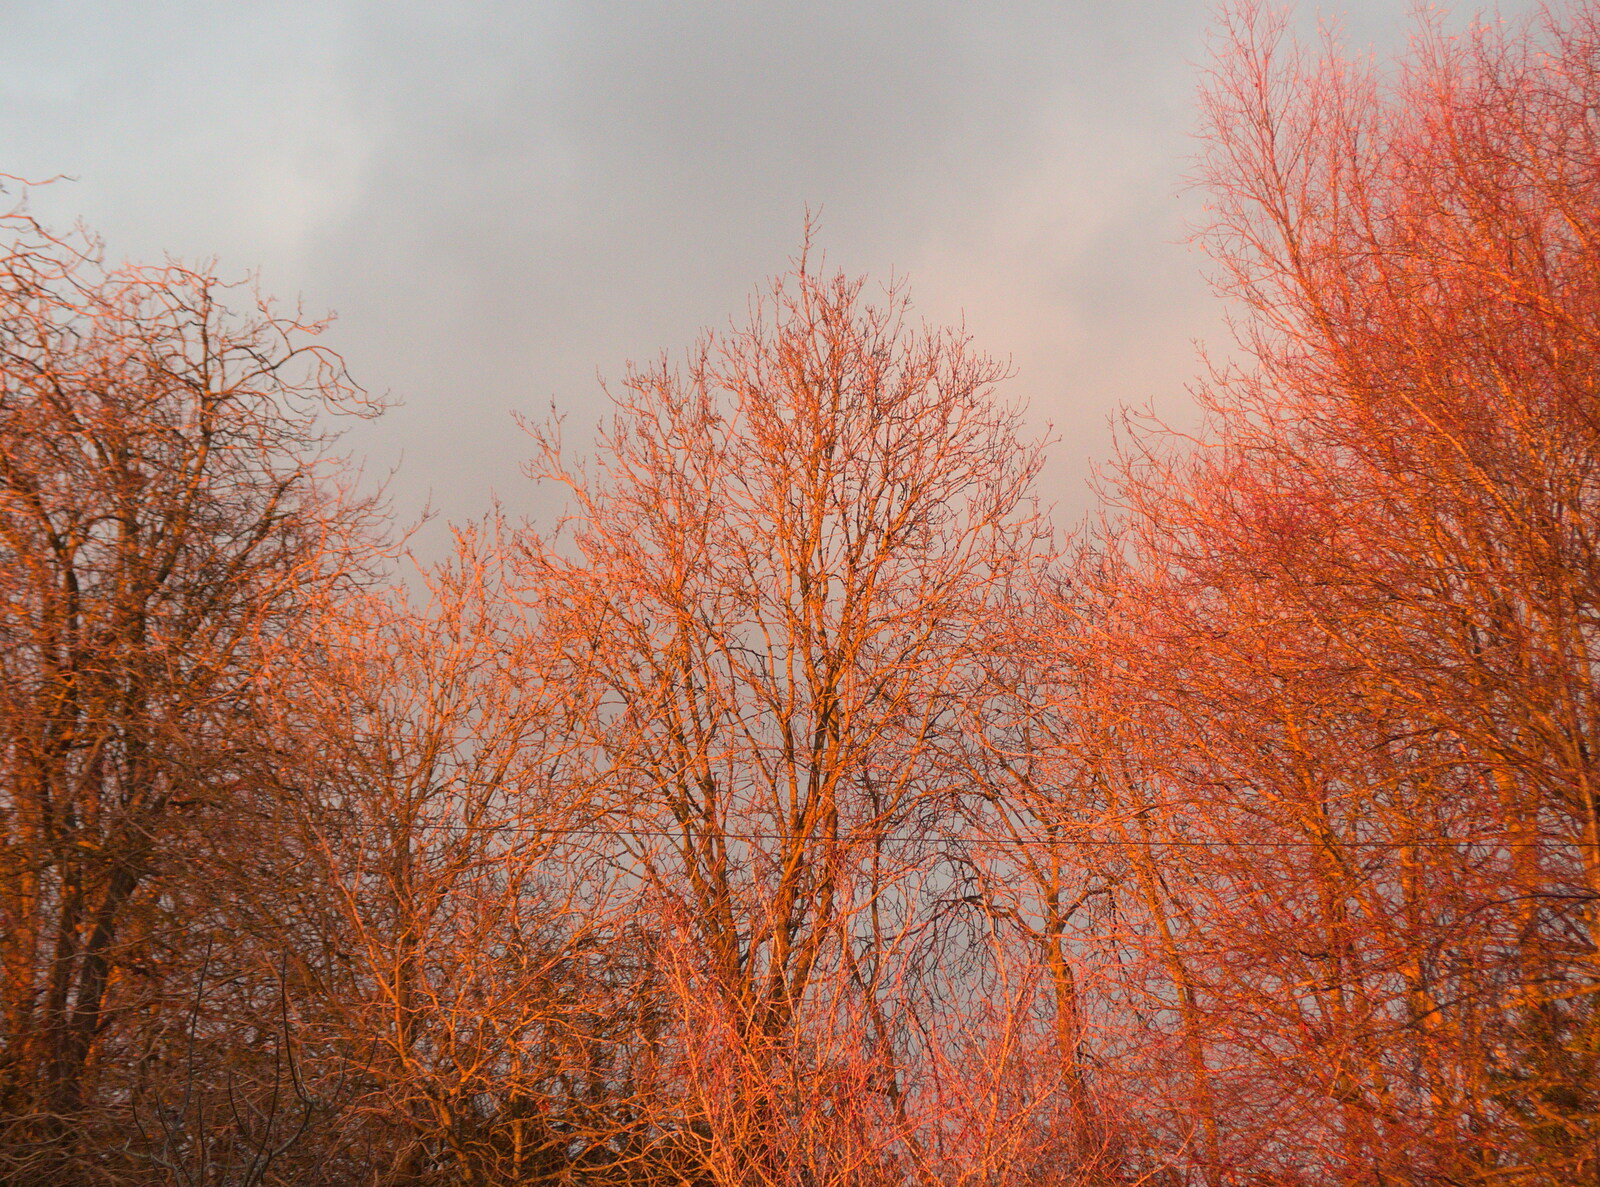 Red sunset light in the trees from A Late November Miscellany, Diss, Brantham and London - 30th November 2017